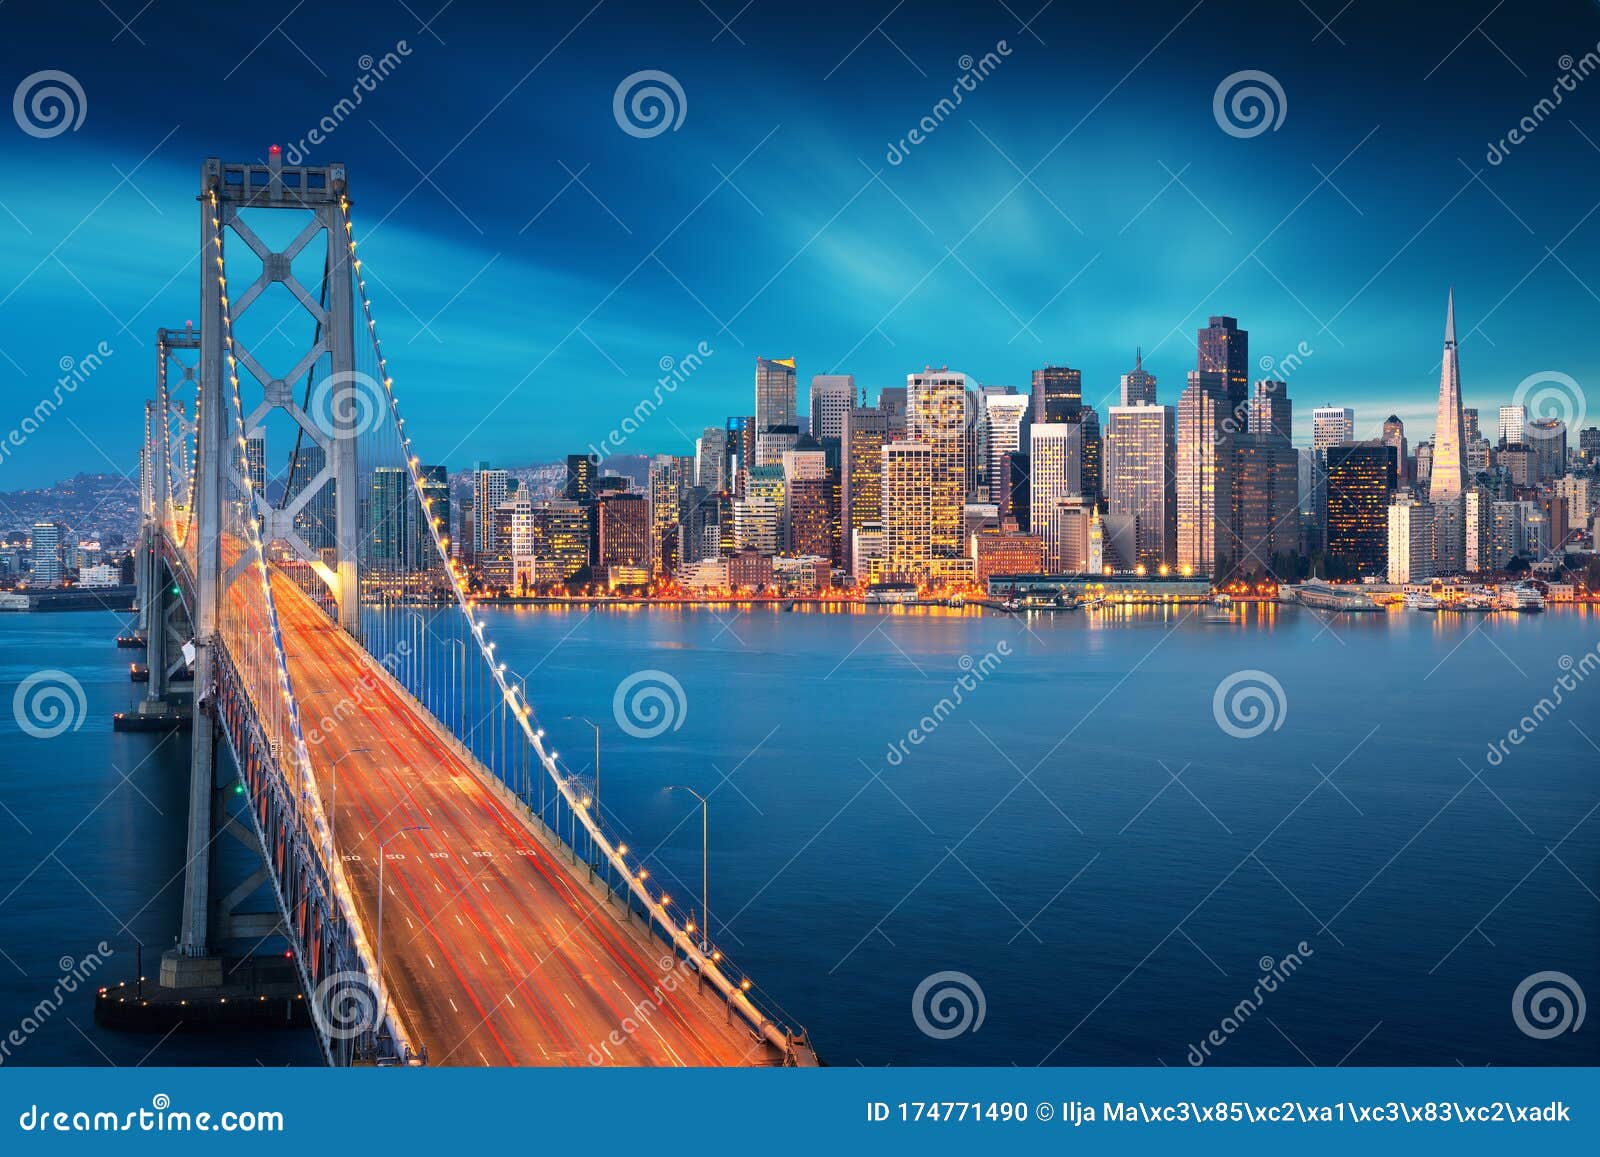 san francisco at sunrise with bay bridge in foreground. amazing view to famous america city. california theme. art photography